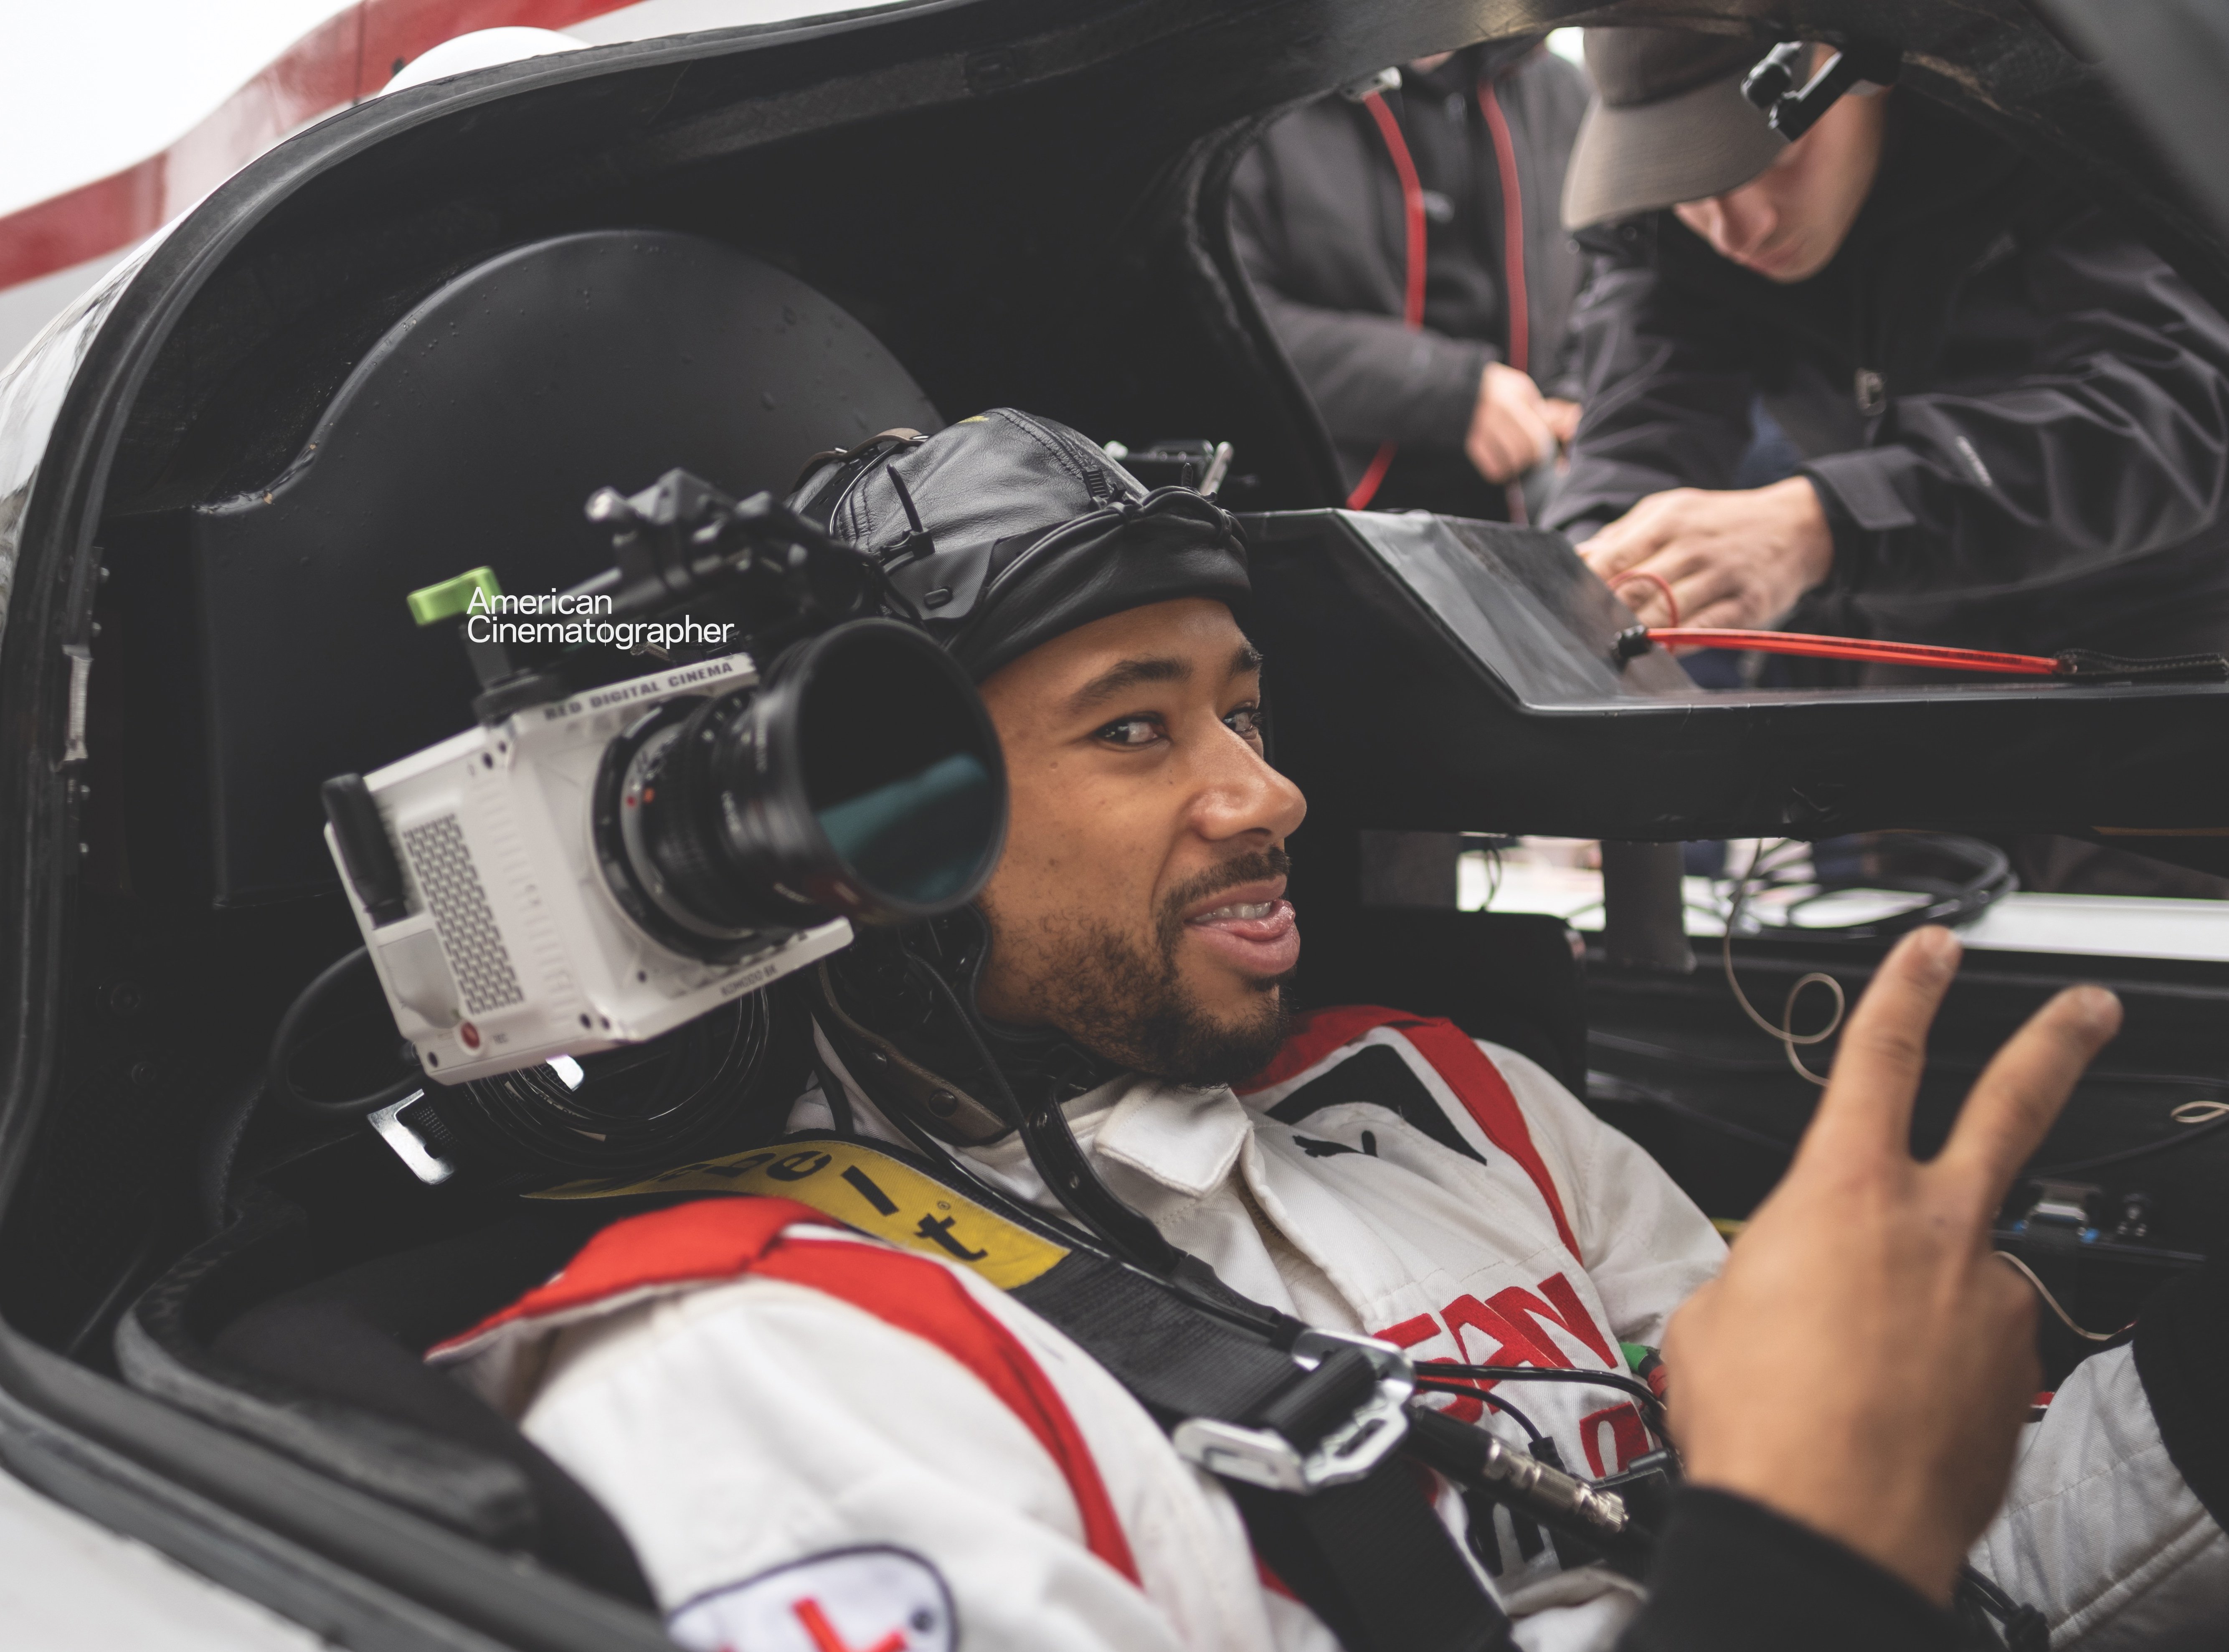 In the Driver's Seat for Gran Turismo - The American Society of